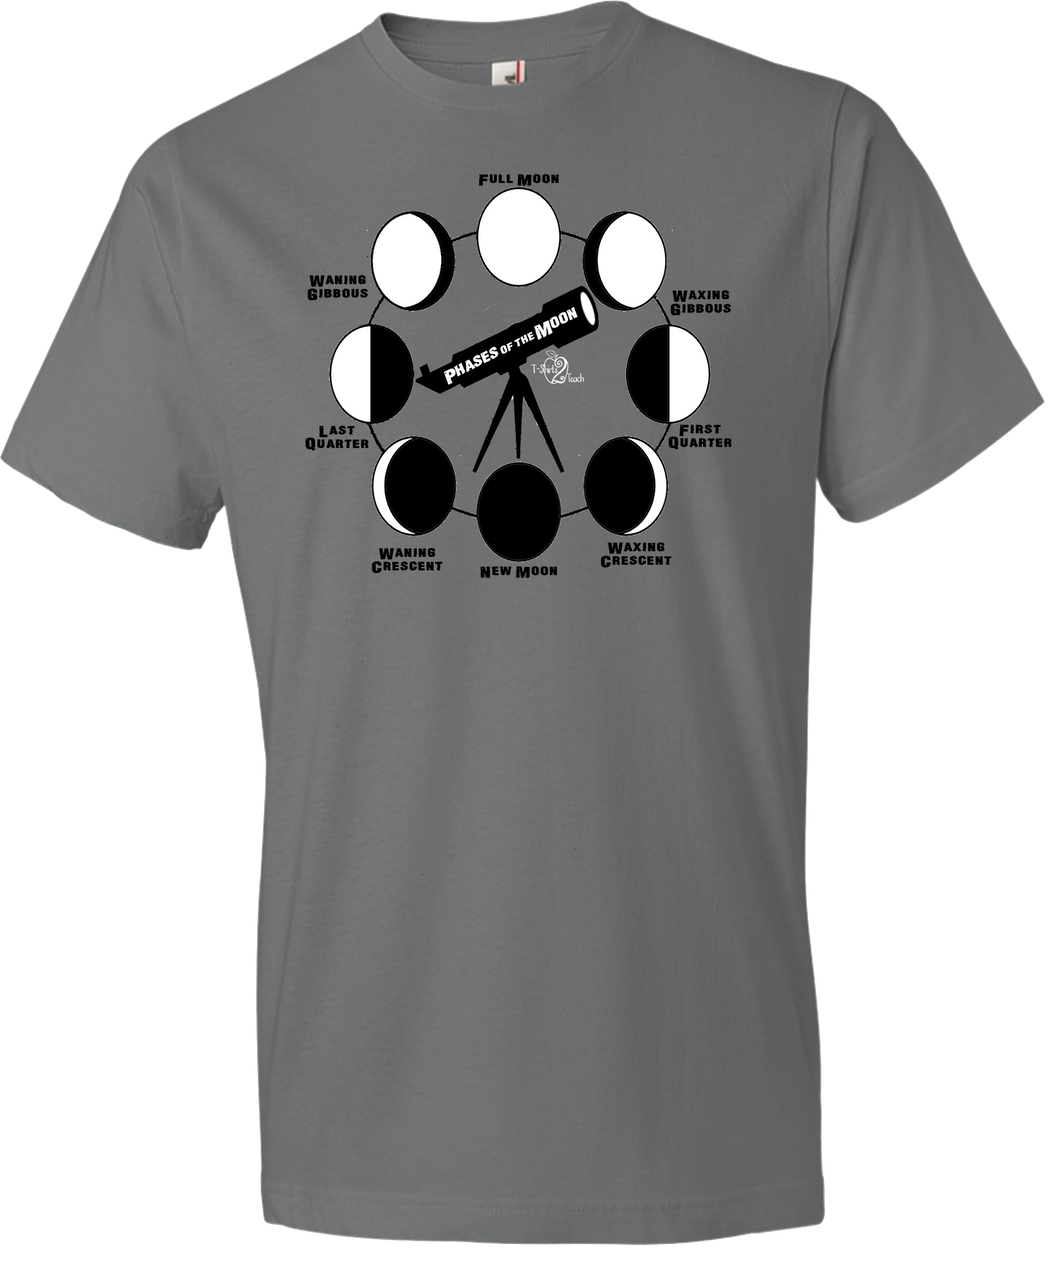 Moon Phases Tee (ONLY Size Small, Medium, 3X)